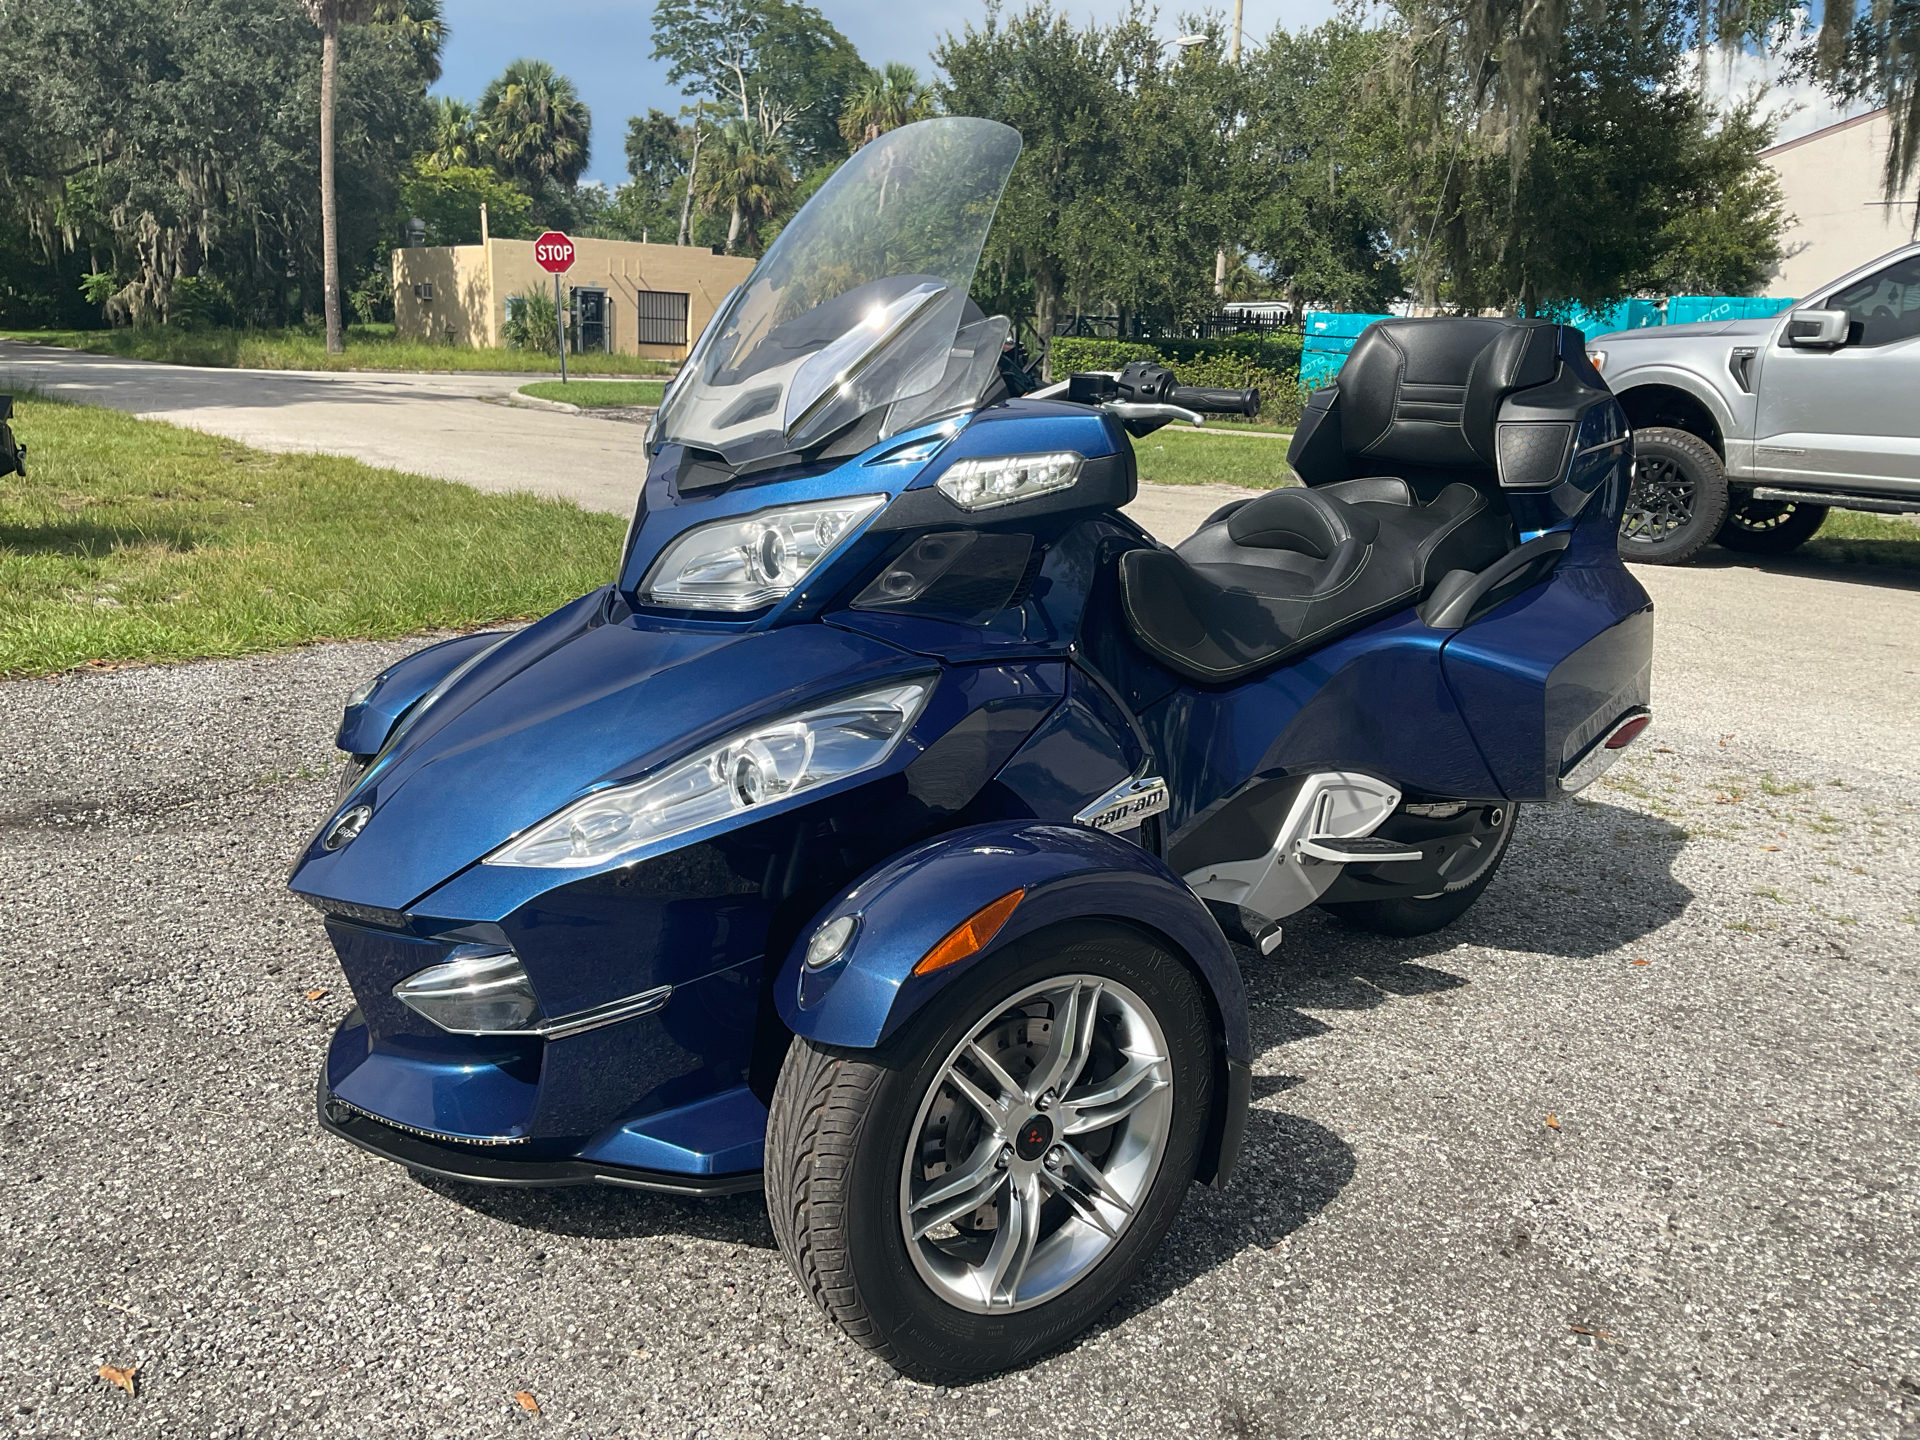 2011 Can-Am Spyder® RT-S SM5 in Sanford, Florida - Photo 6